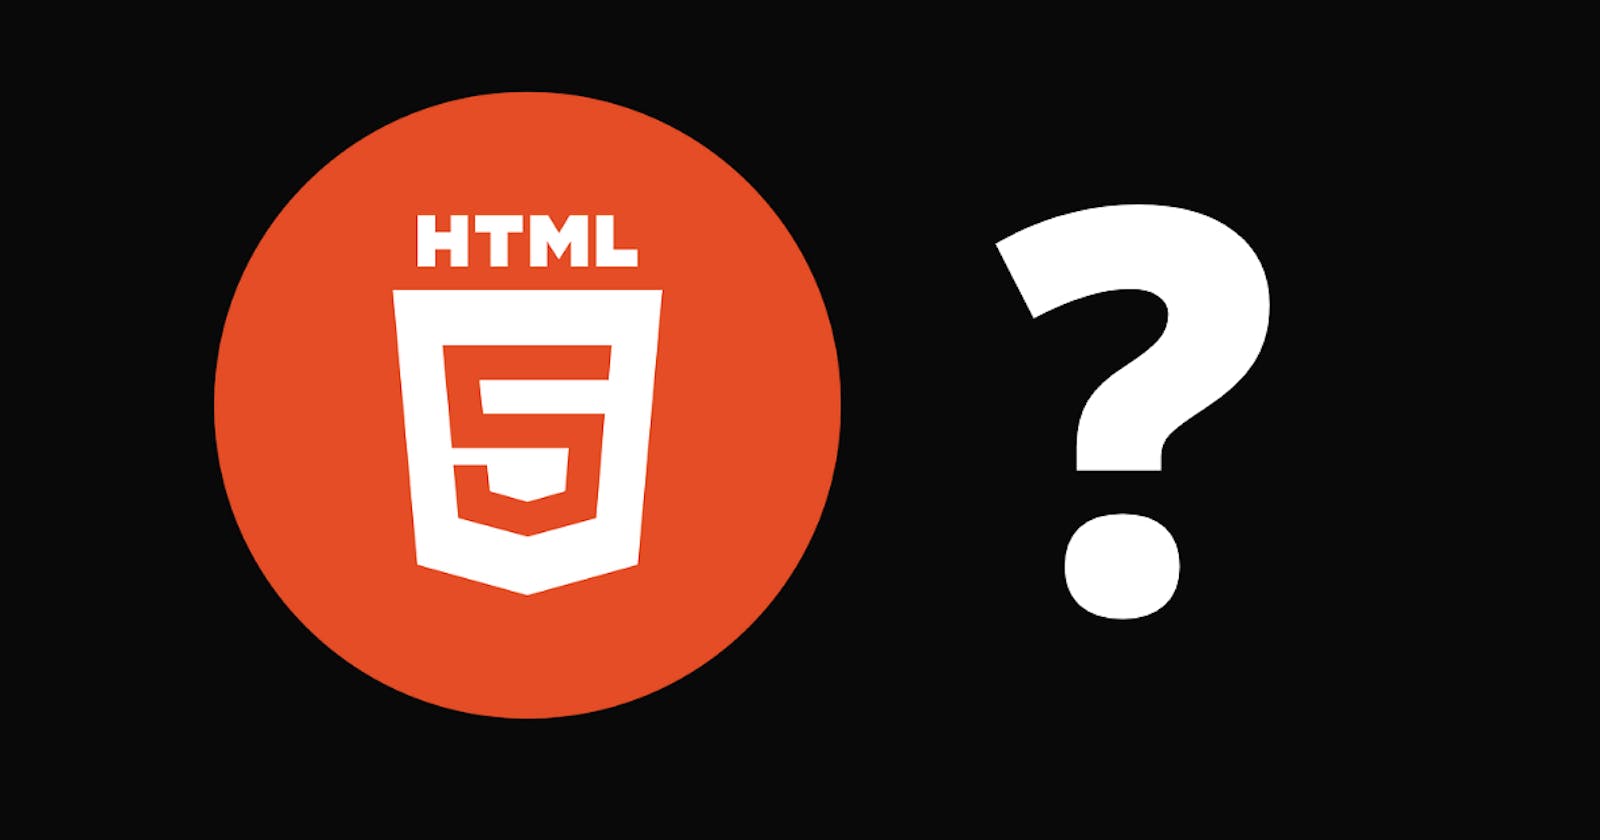 An Introduction to HTML